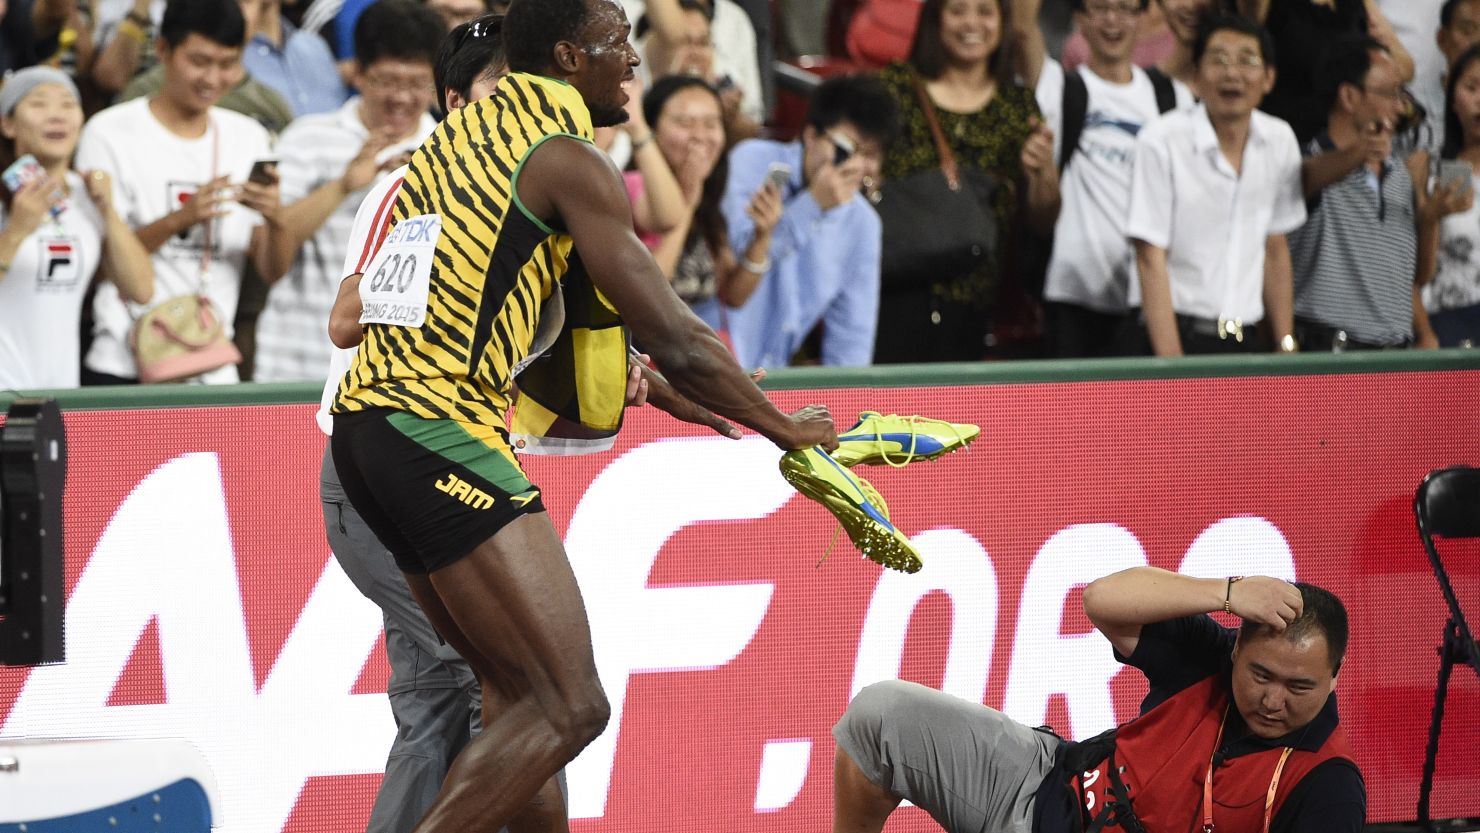 Usain Bolt reacts after a cameraman on a Segway crashes into him in Beijing on Wednesday.